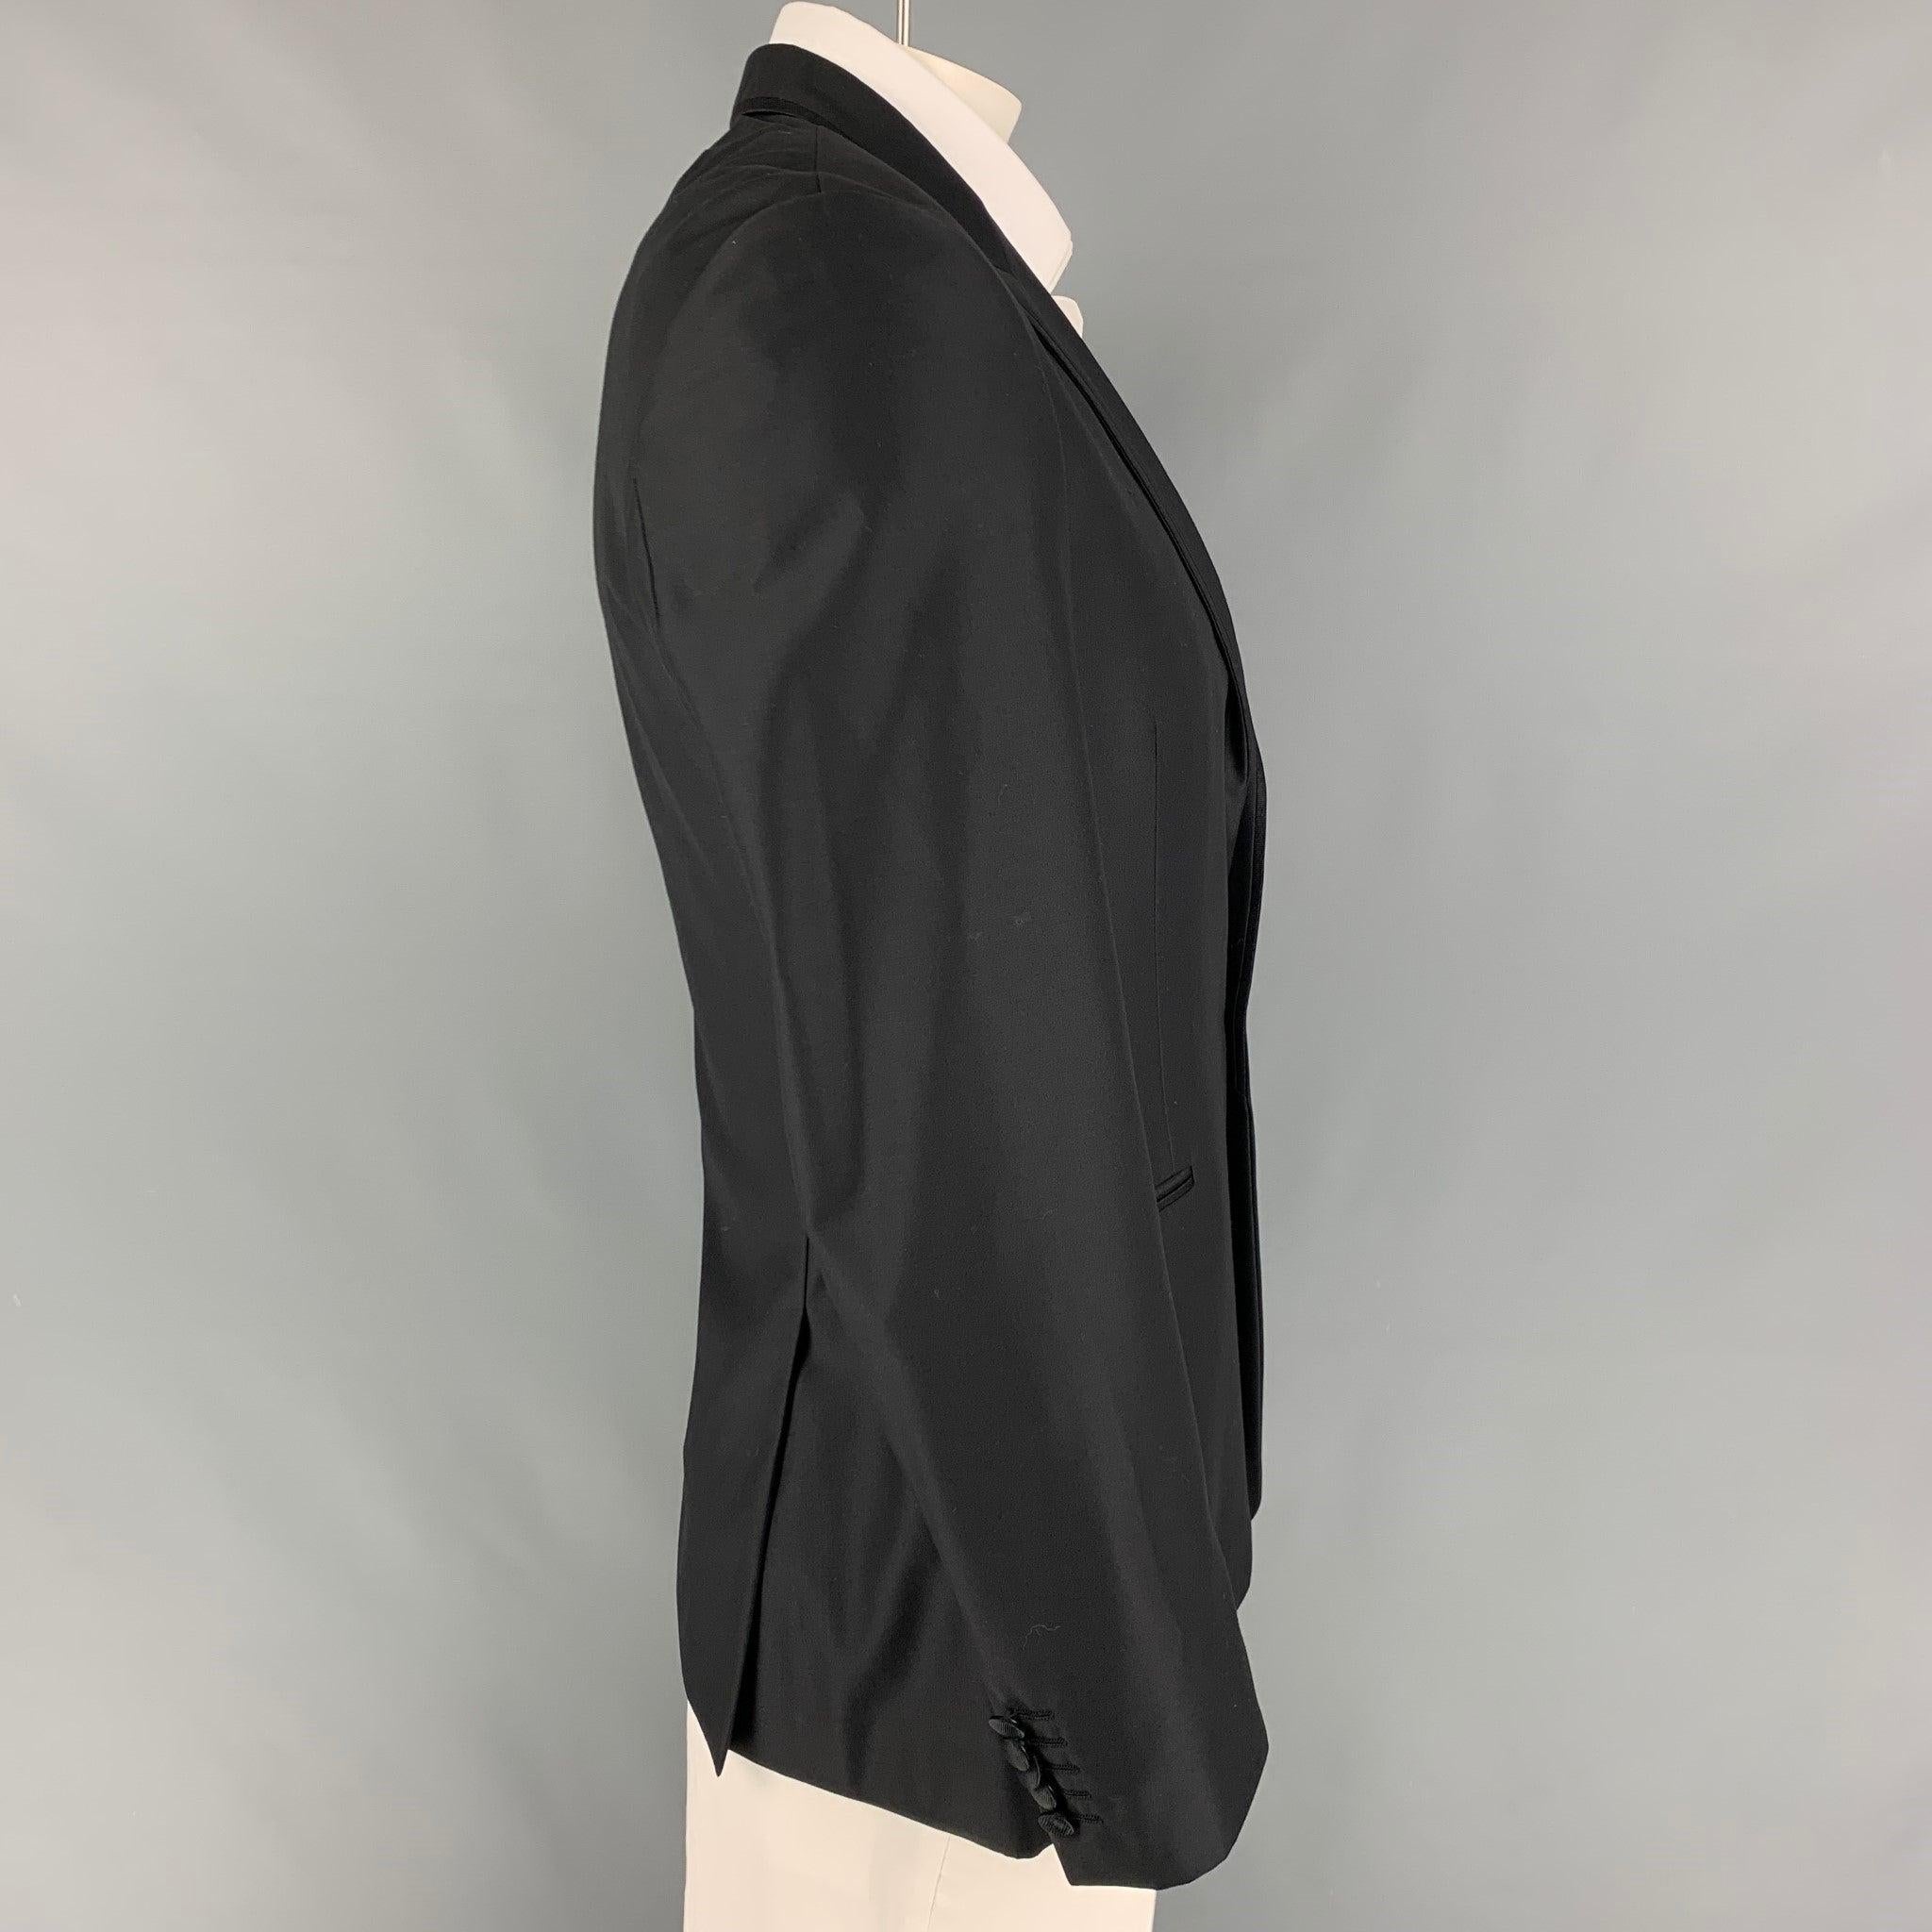 PAUL SMITH sport coat comes in a black wool featuring a peak lapel, slit pockets, double back vent, and a double button closure. Made in Italy.
Very Good
Pre-Owned Condition. 

Marked:   42 R  

Measurements: 
 
Shoulder: 18 inches  Chest: 40 inches